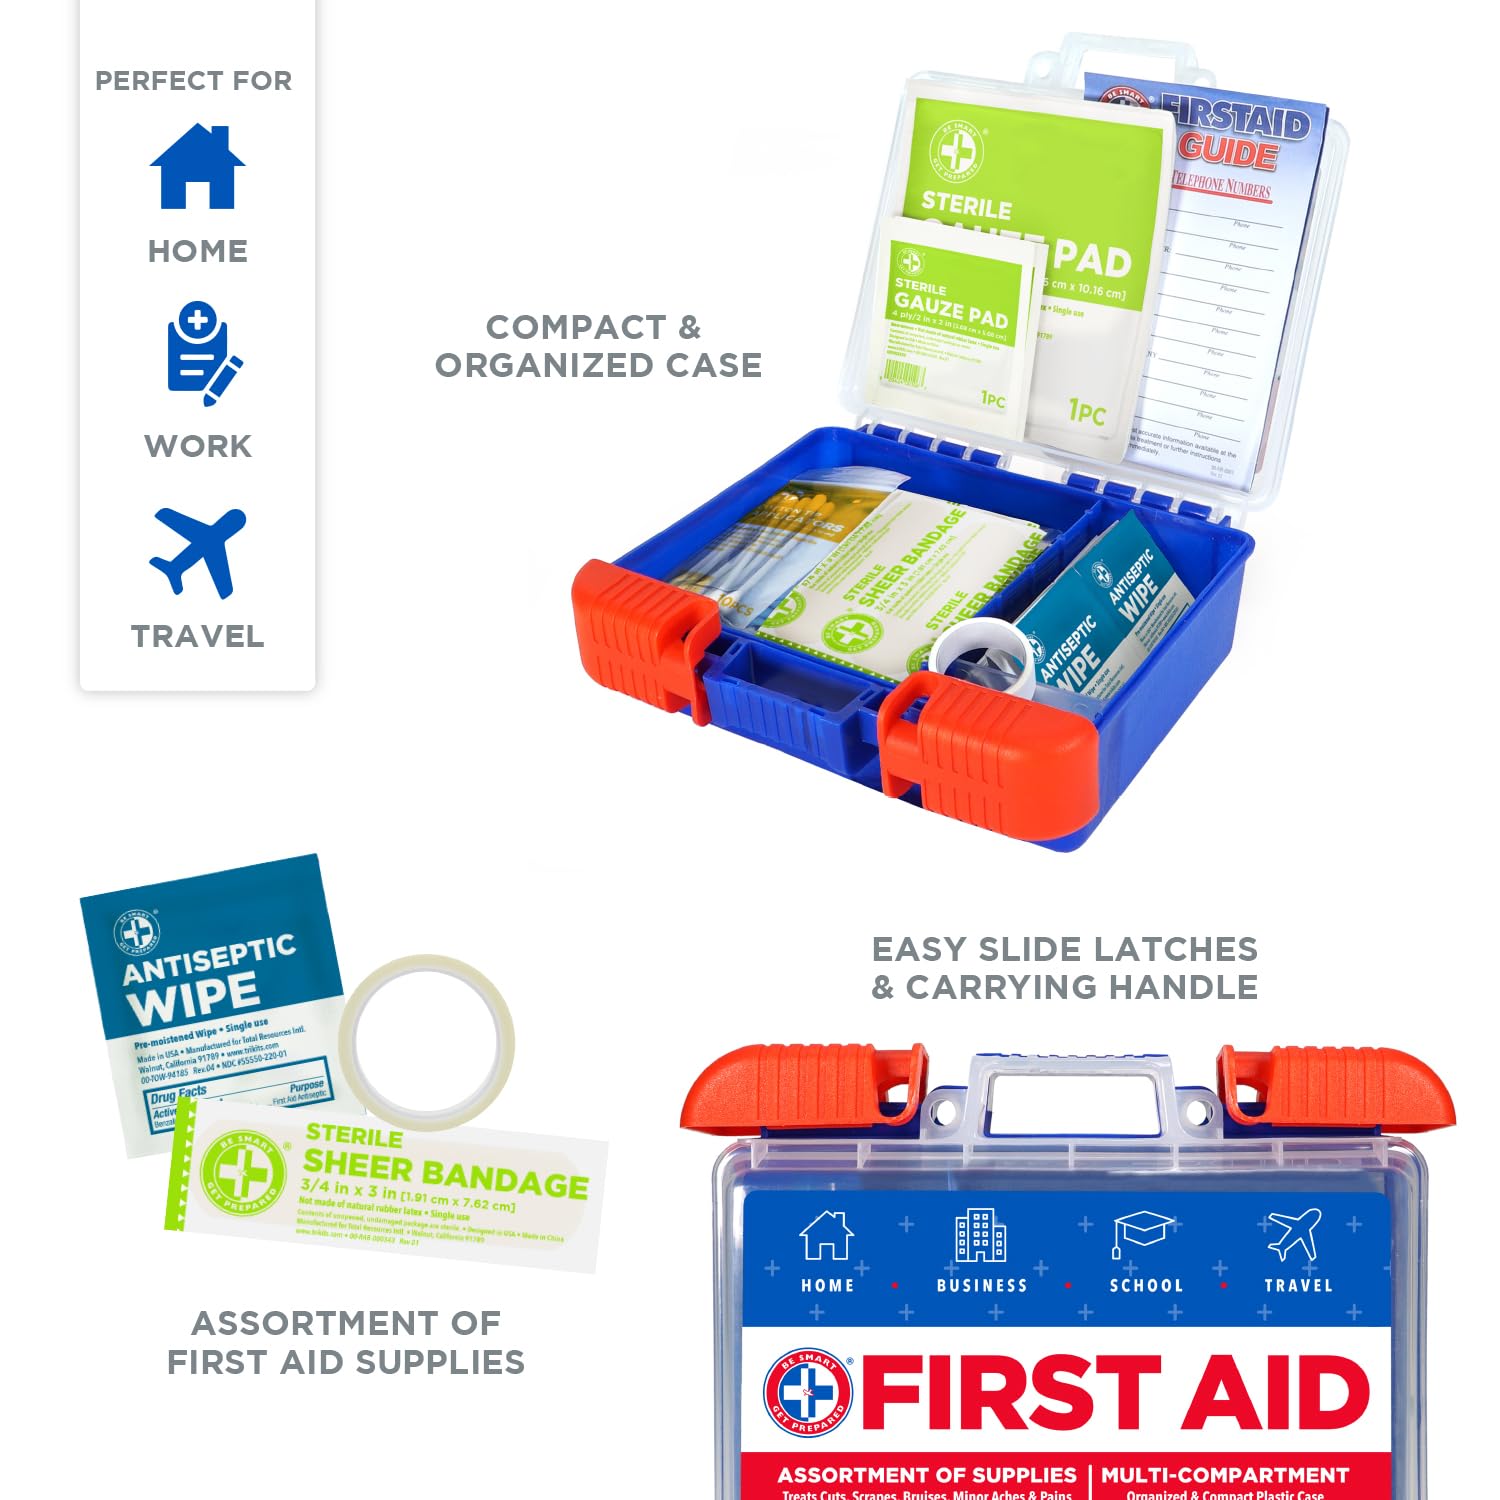 Be Smart Get Prepared 110 pc First Aid Kit: Clean, Treat, Protect Minor Cuts, Home, Office, Car, School, Business, Travel, Emergency, Outdoor, Camping & Sports, FSA/HSA (Packaging may vary)